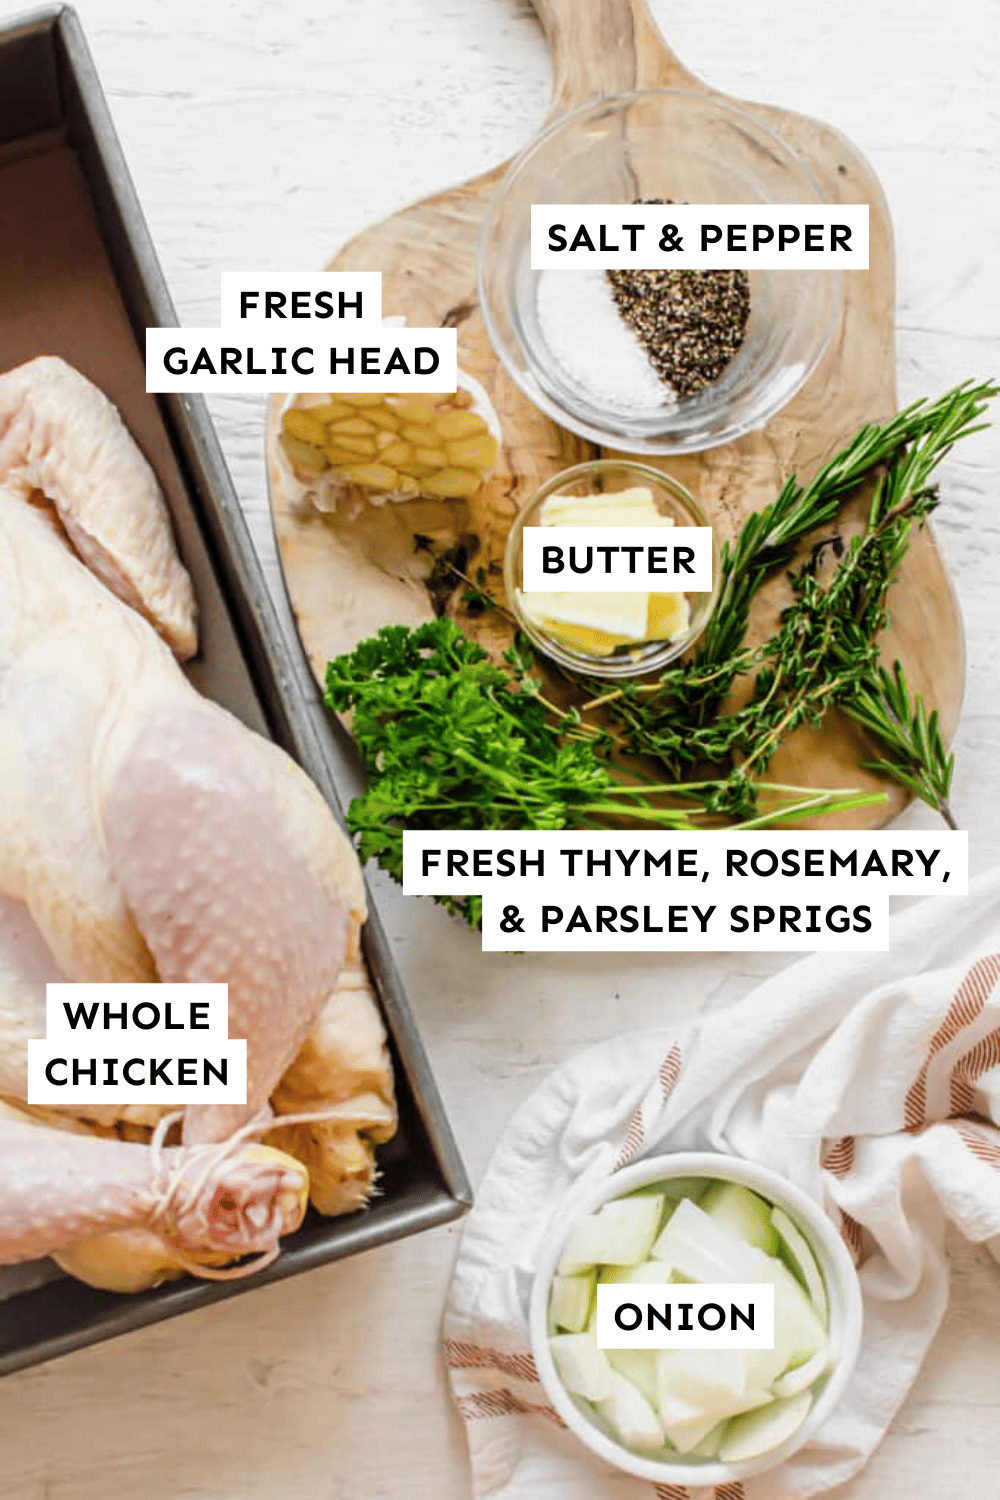 Ingredients for cooking a whole chicken in the Instant Pot, laid out on a counter and labeled.